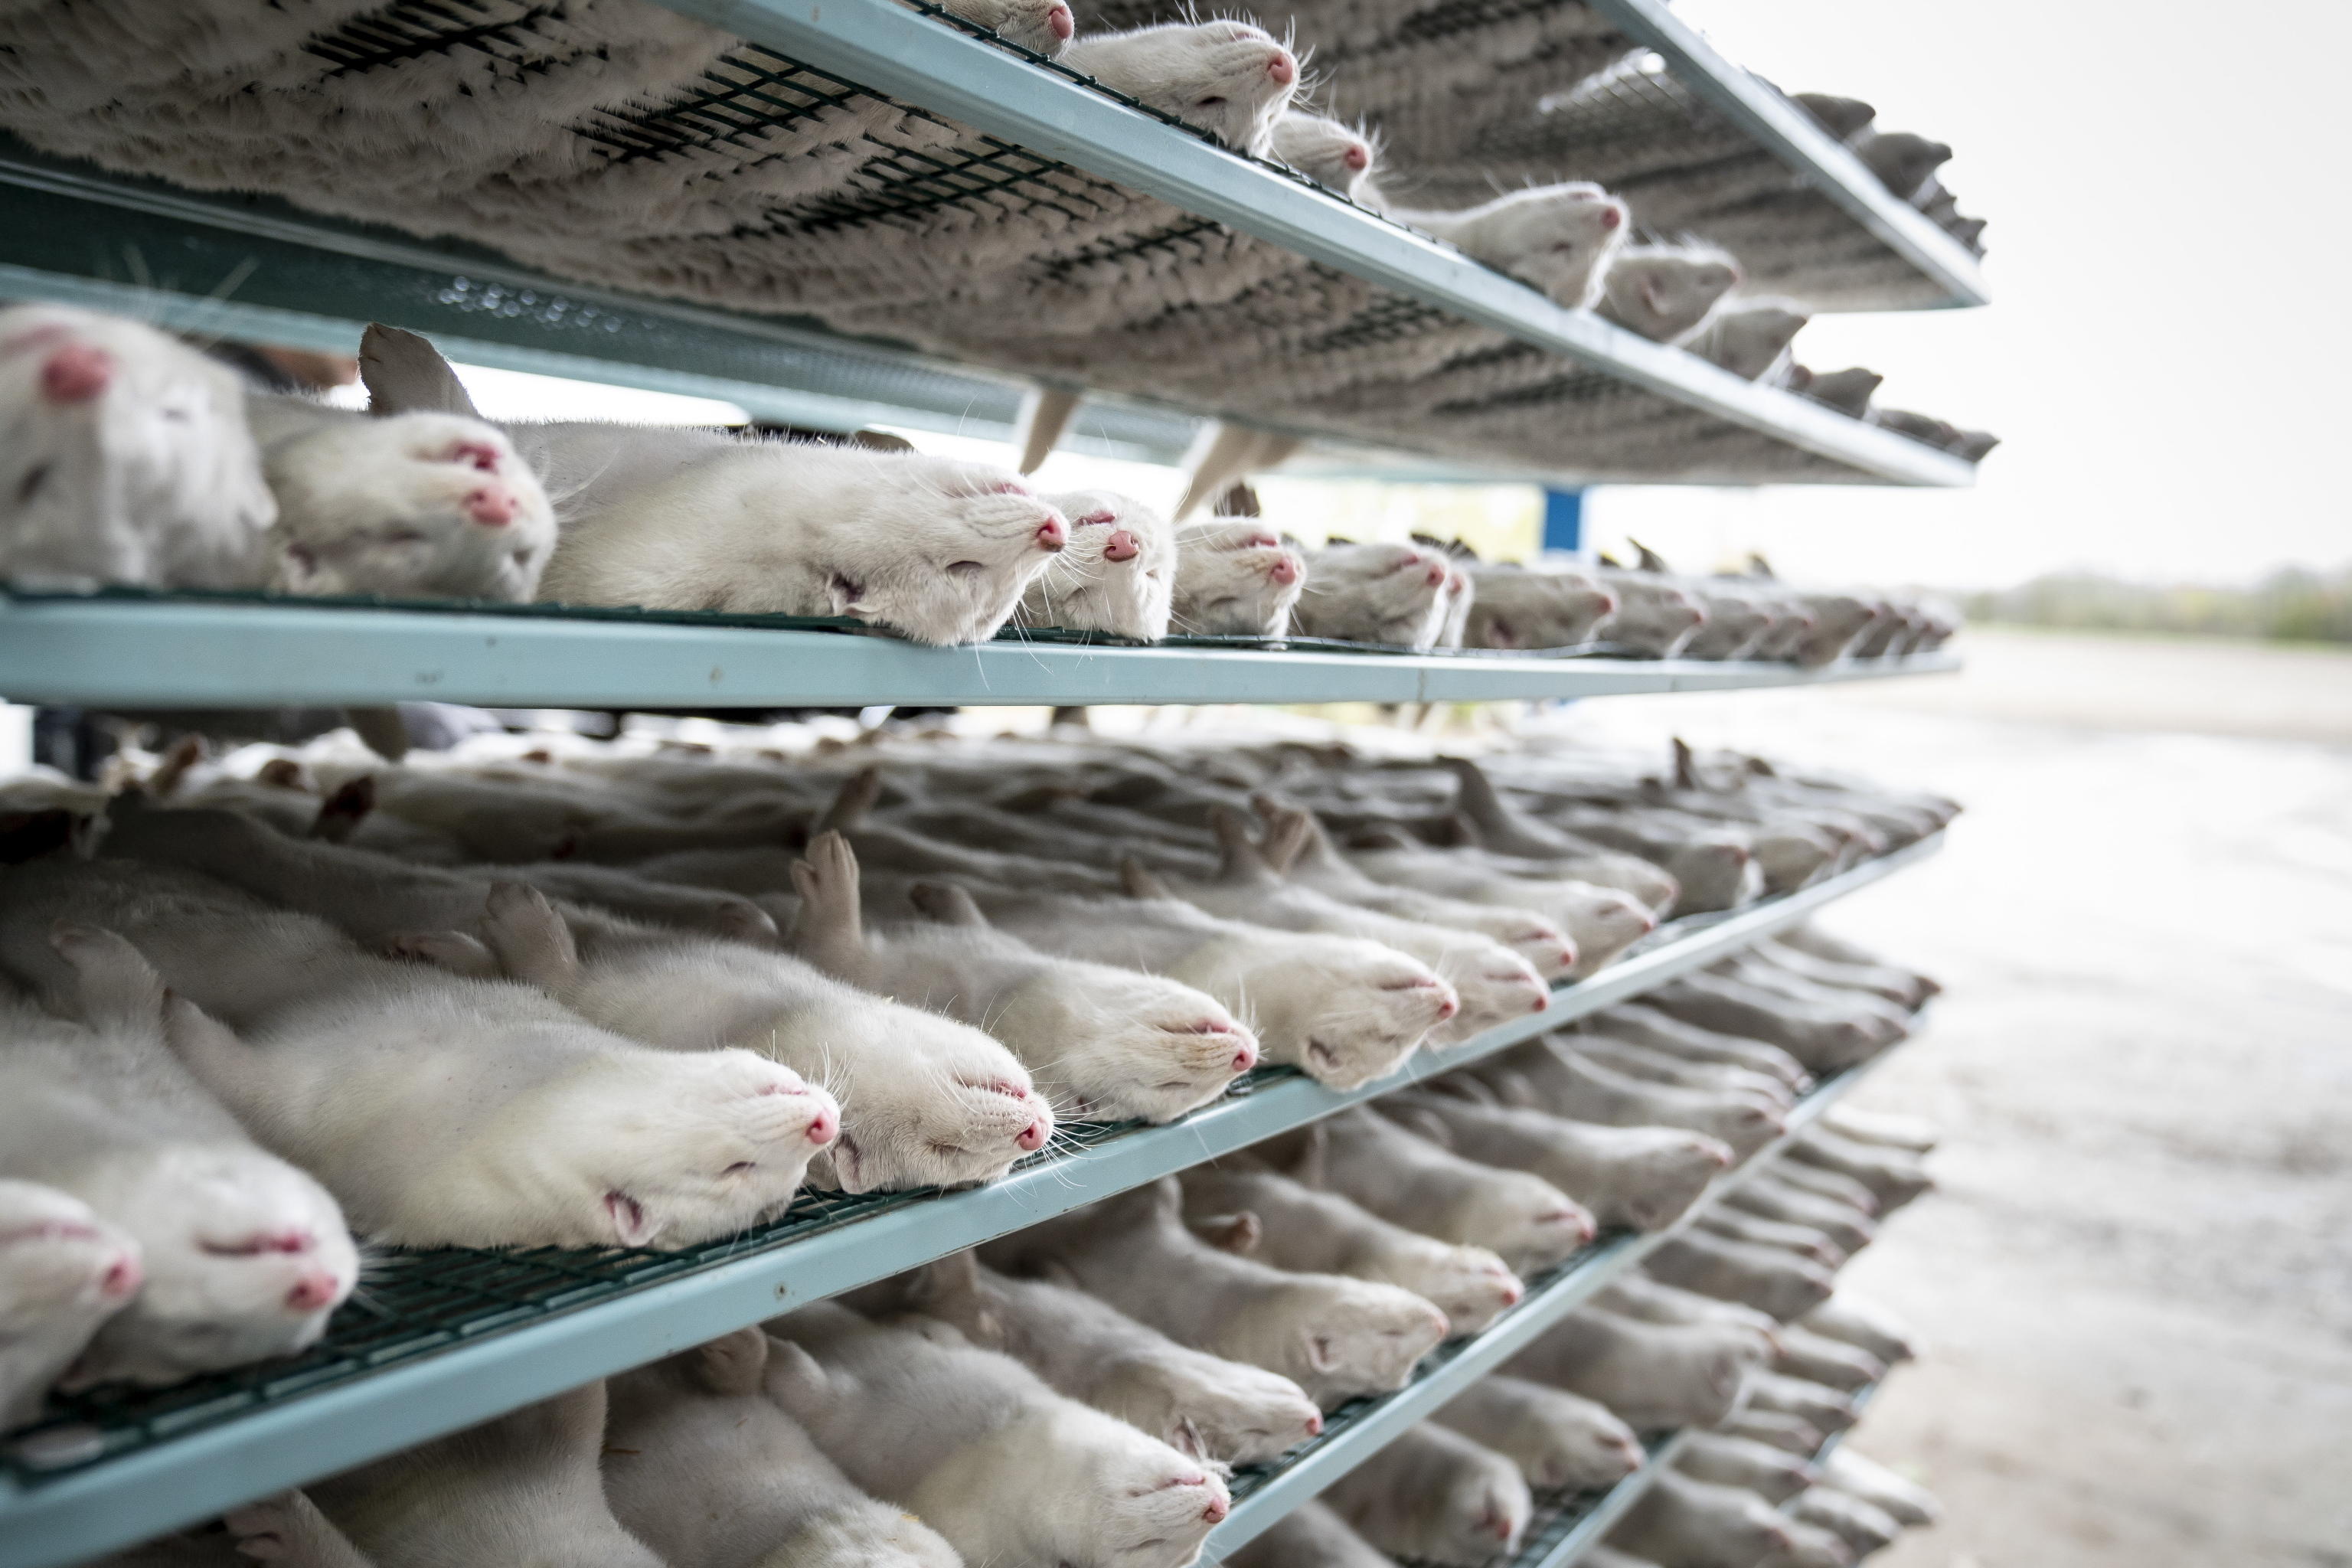 epa08803246 Minks that were put down are transported to machines to further process them, at the mink fur farm which consists of 3000 mother minks and their cubs on their farm near Naestved, Denmark, 06 November 2020. The furs are stored in three freezers before selling them, as the minks on their farm are not affected by corona and there have been no corona cases in mink on Zealand and Funen. Mink farms throughout Denmark have been ordered by the government to cull all animals to prevent the spread of a new discovered mutated coronavirus. EPA/Mads Claus Rasmussen DENMARK OUT ATTENTION: This Image is part of a PHOTO SET